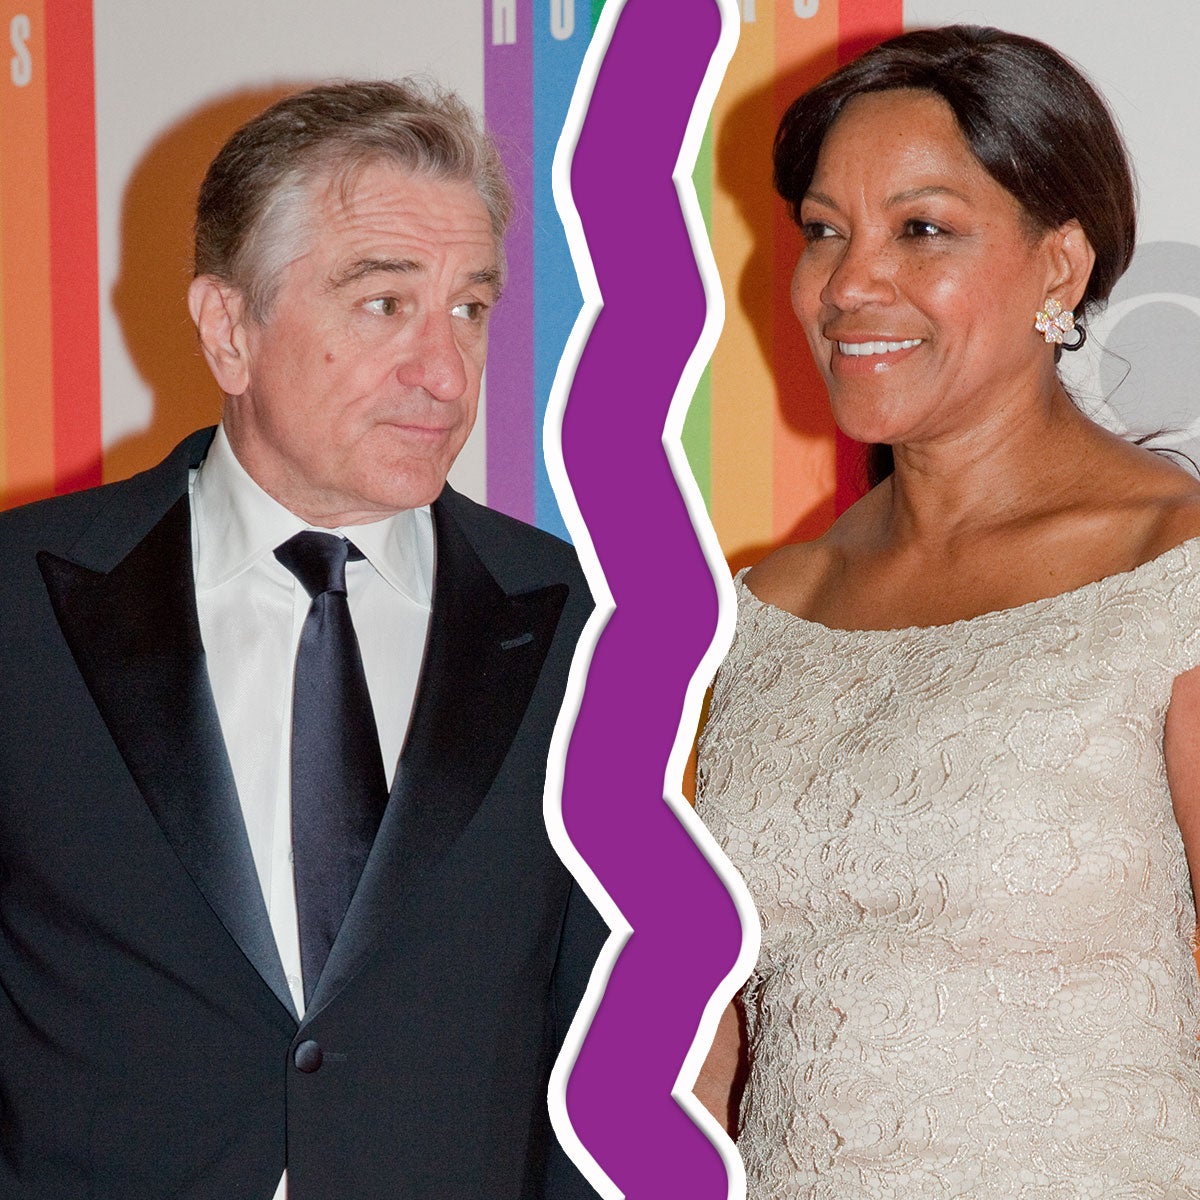 Robert De Niro and Wife Grace Hightower Are Divorcing After 20 Years Of Marriage